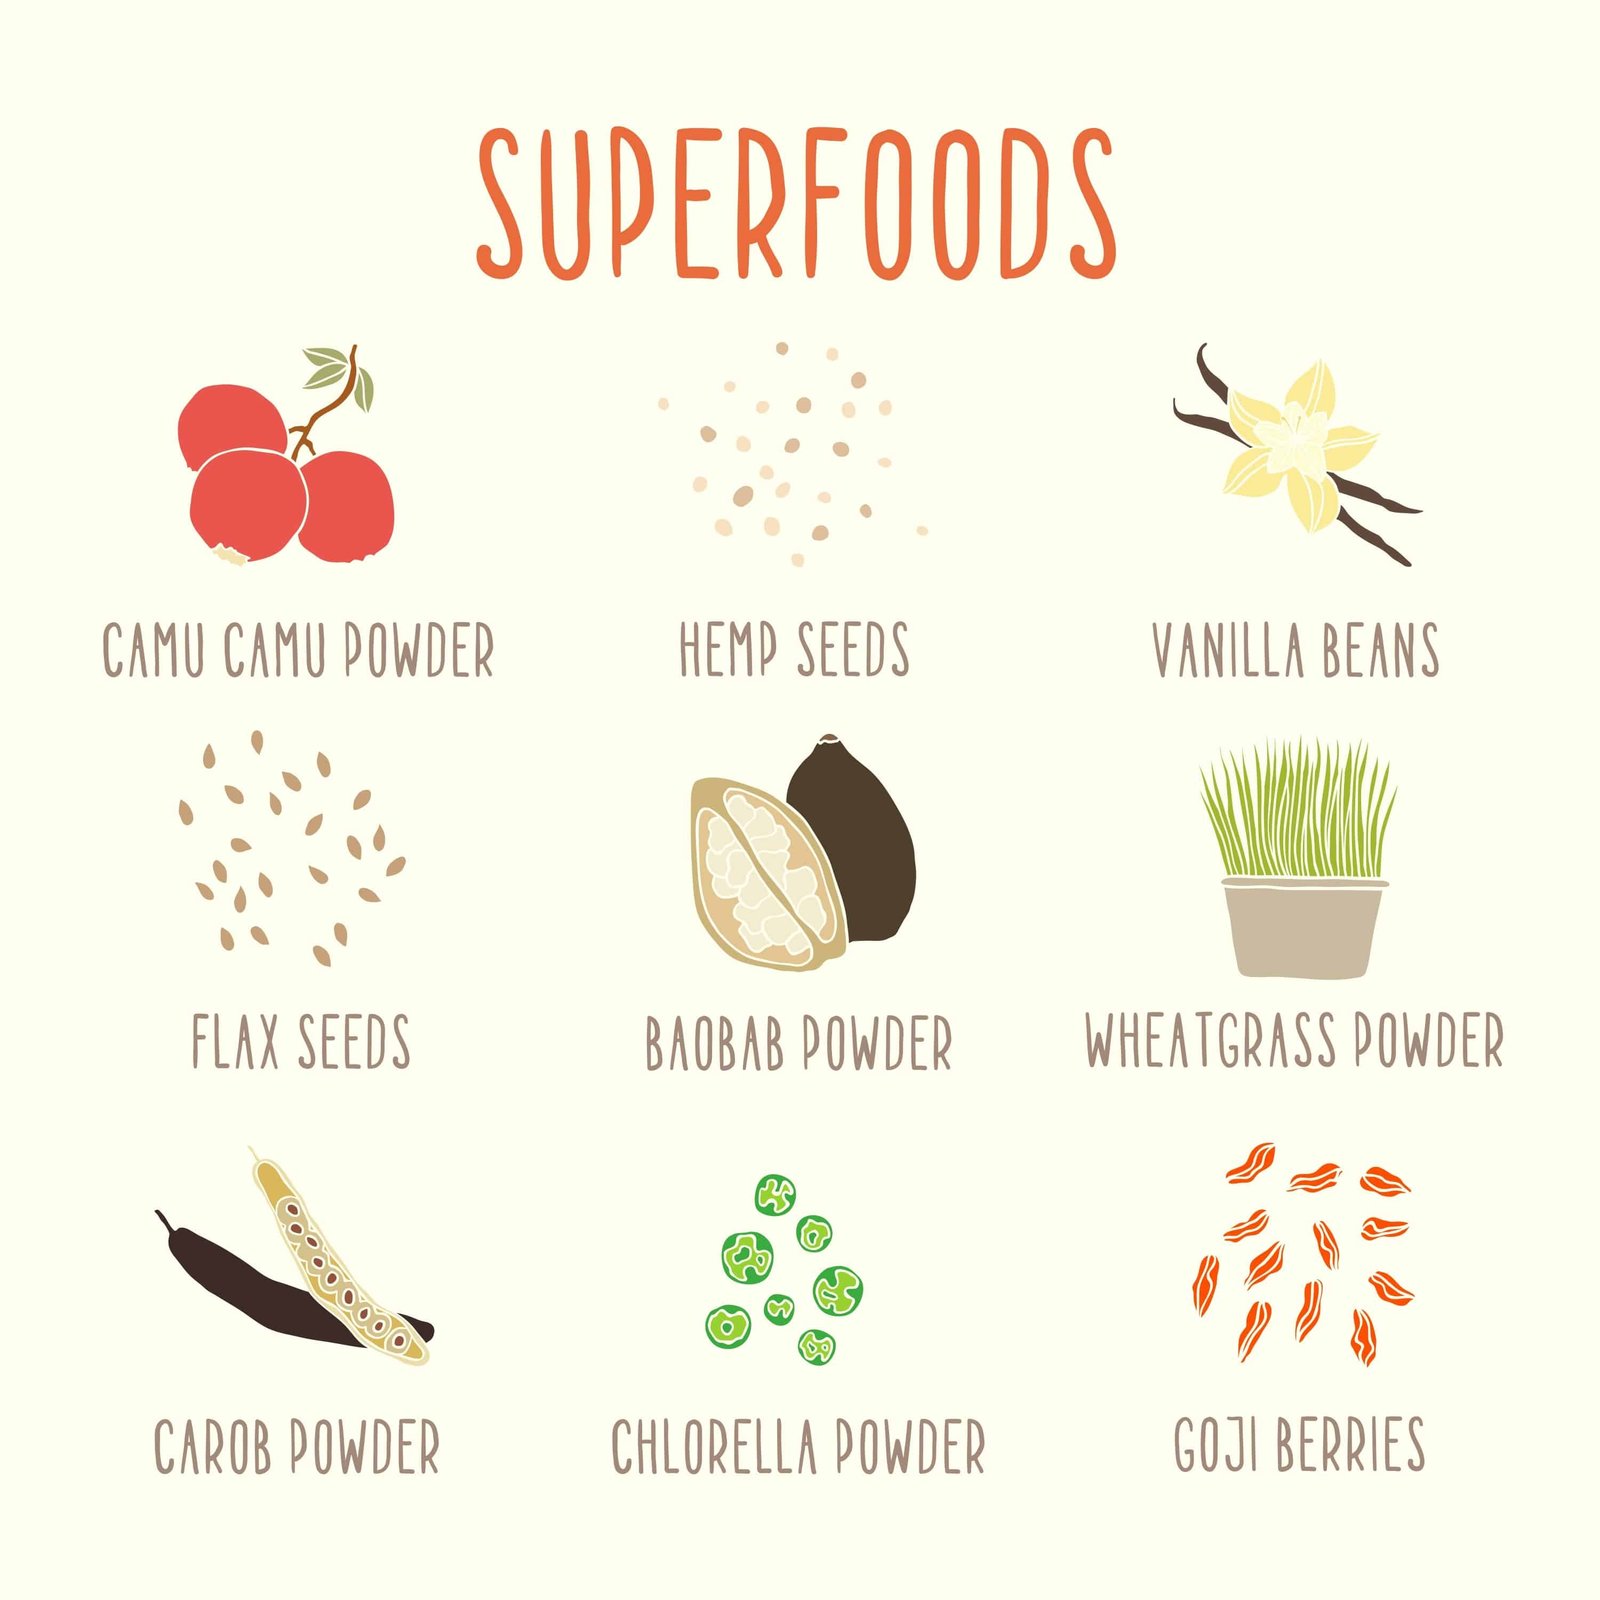 Are Superfoods Really Super?